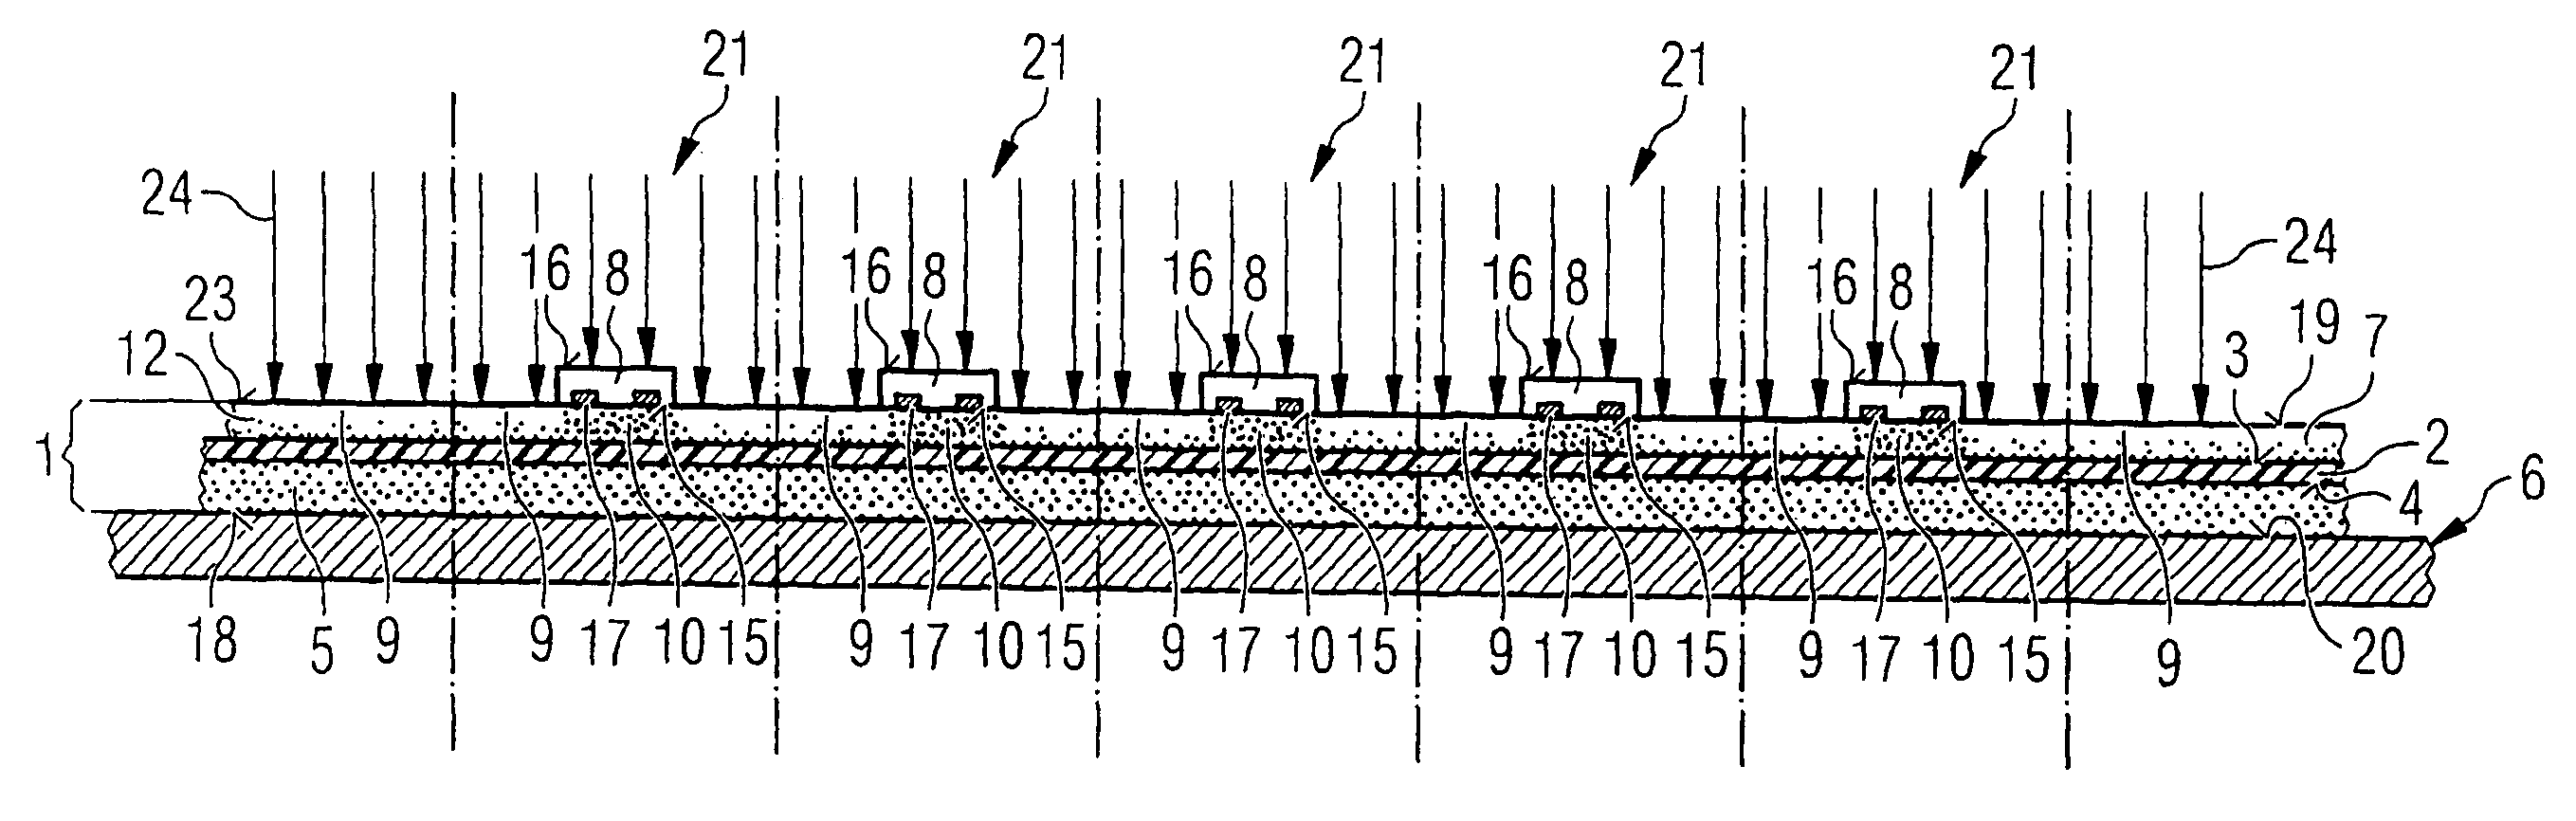 Carrier sheet with adhesive film and method for producing semiconductor devices using the carrier sheet with adhesive film